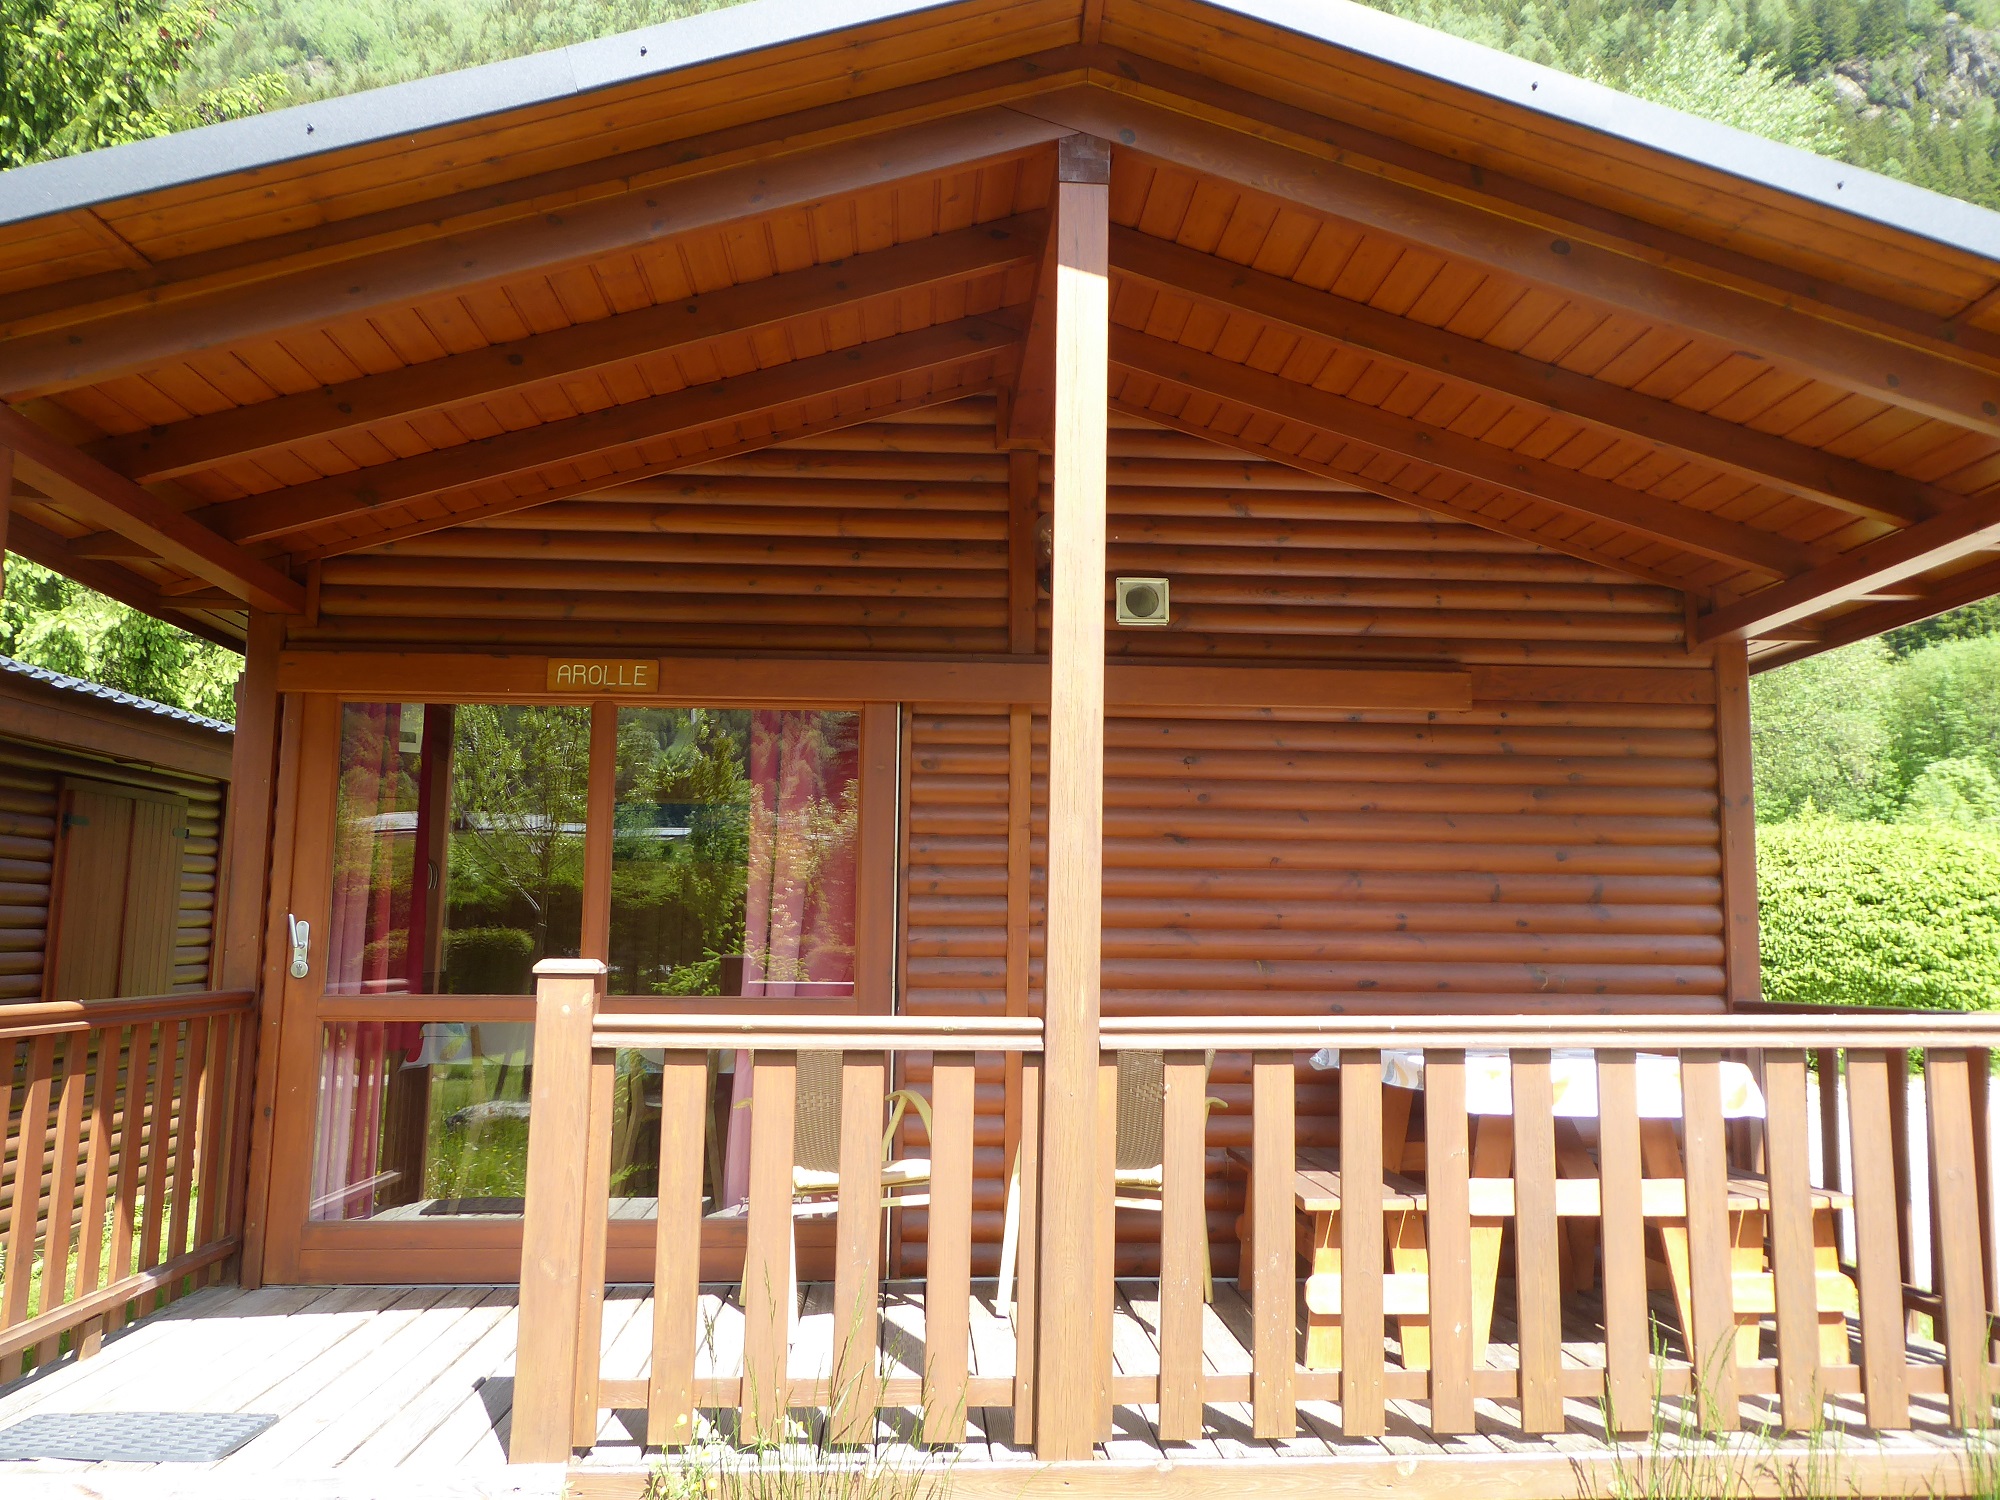 Accommodation - Chalet Arolles 2 Bedrooms / Arrival And Departure On Saturday In July And August - Camping Les Marmottes